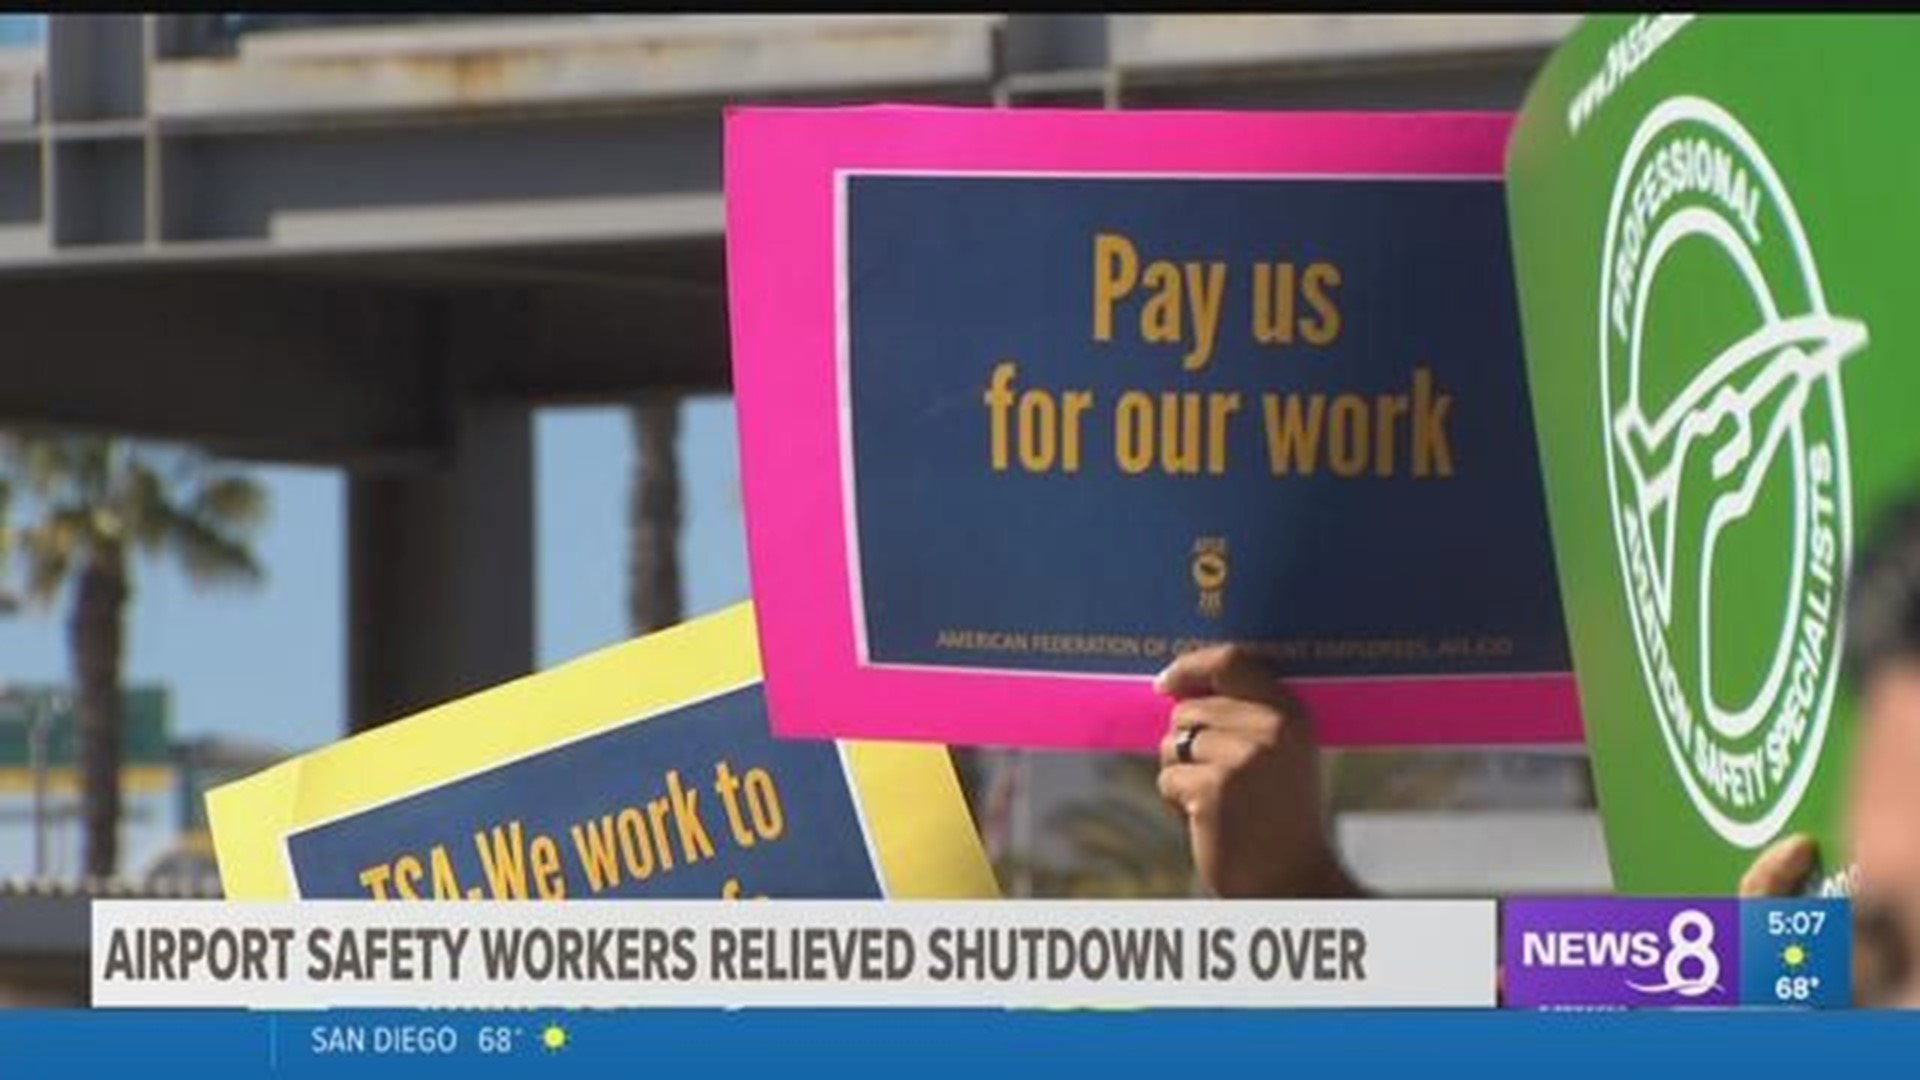 Airport safety workers relieved shutdown is over, for now